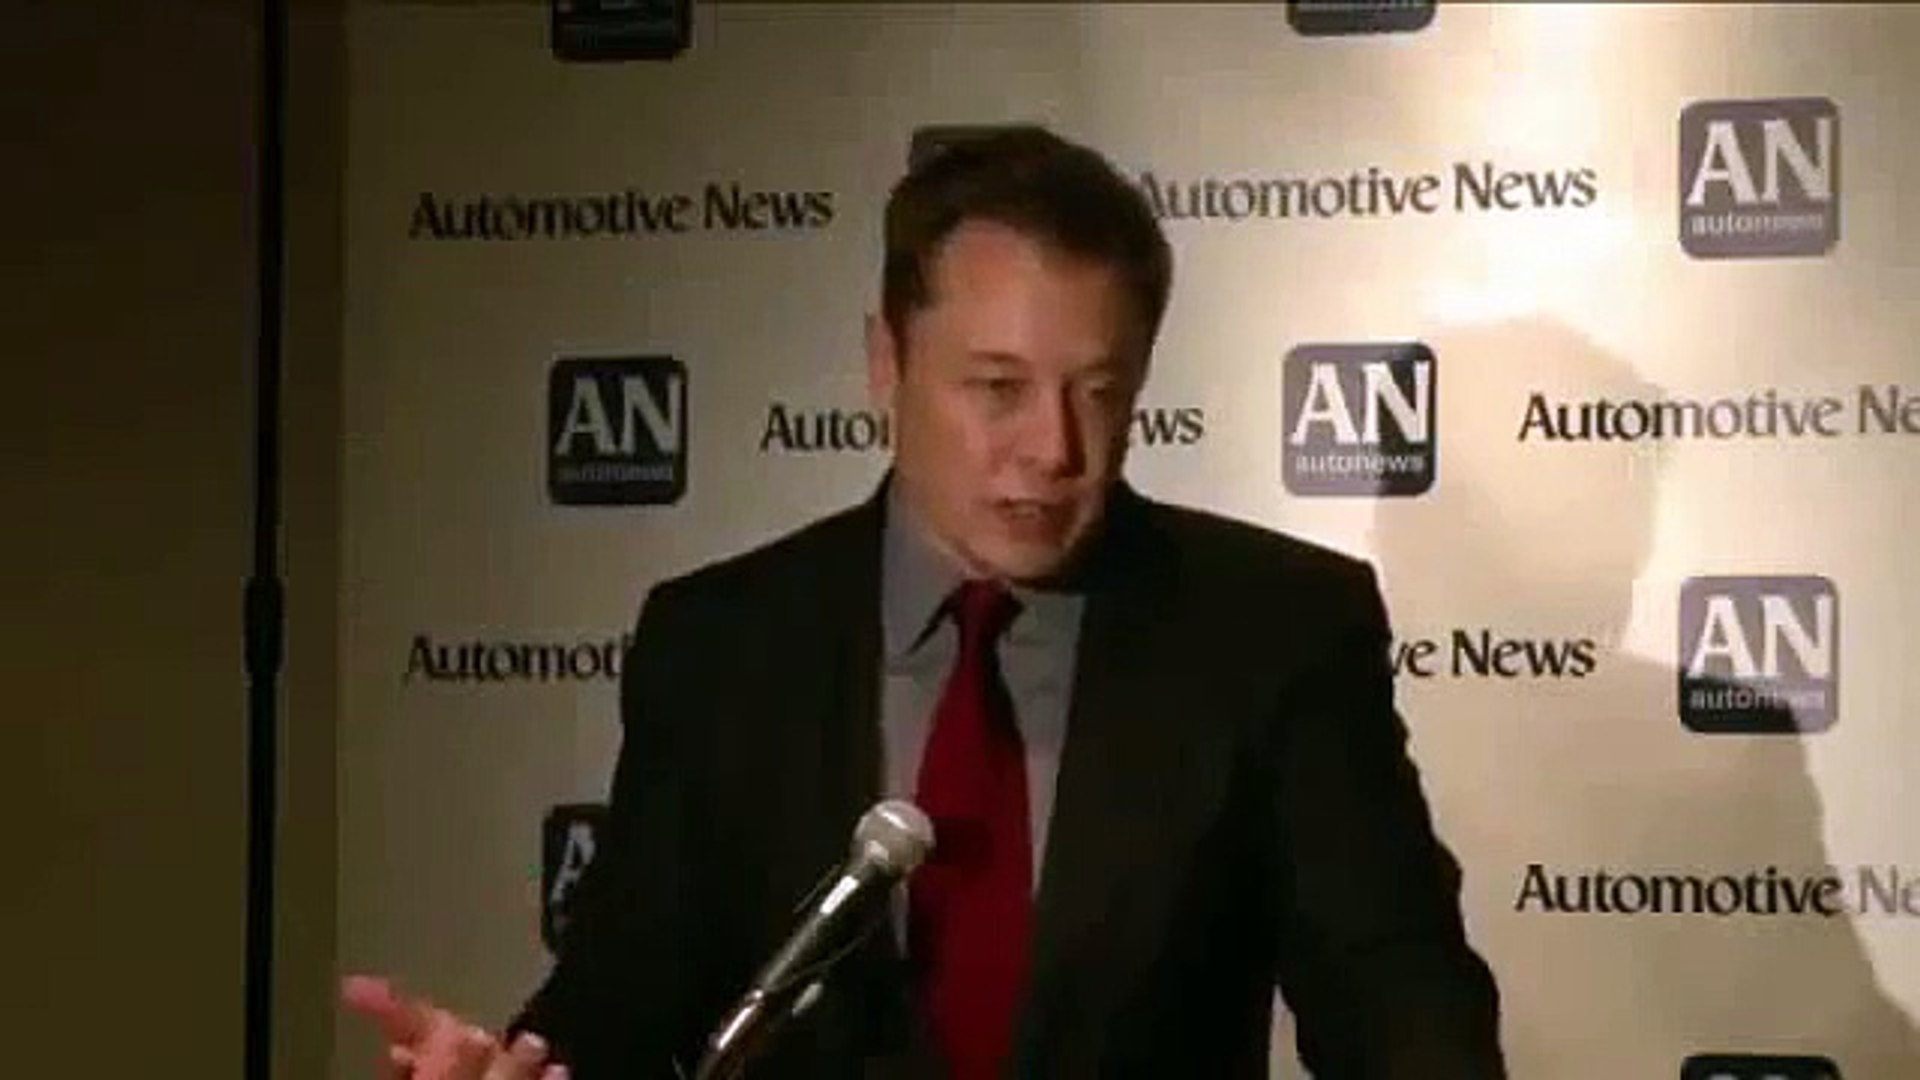 TECHNOLOGY Elon Musk s we are happy